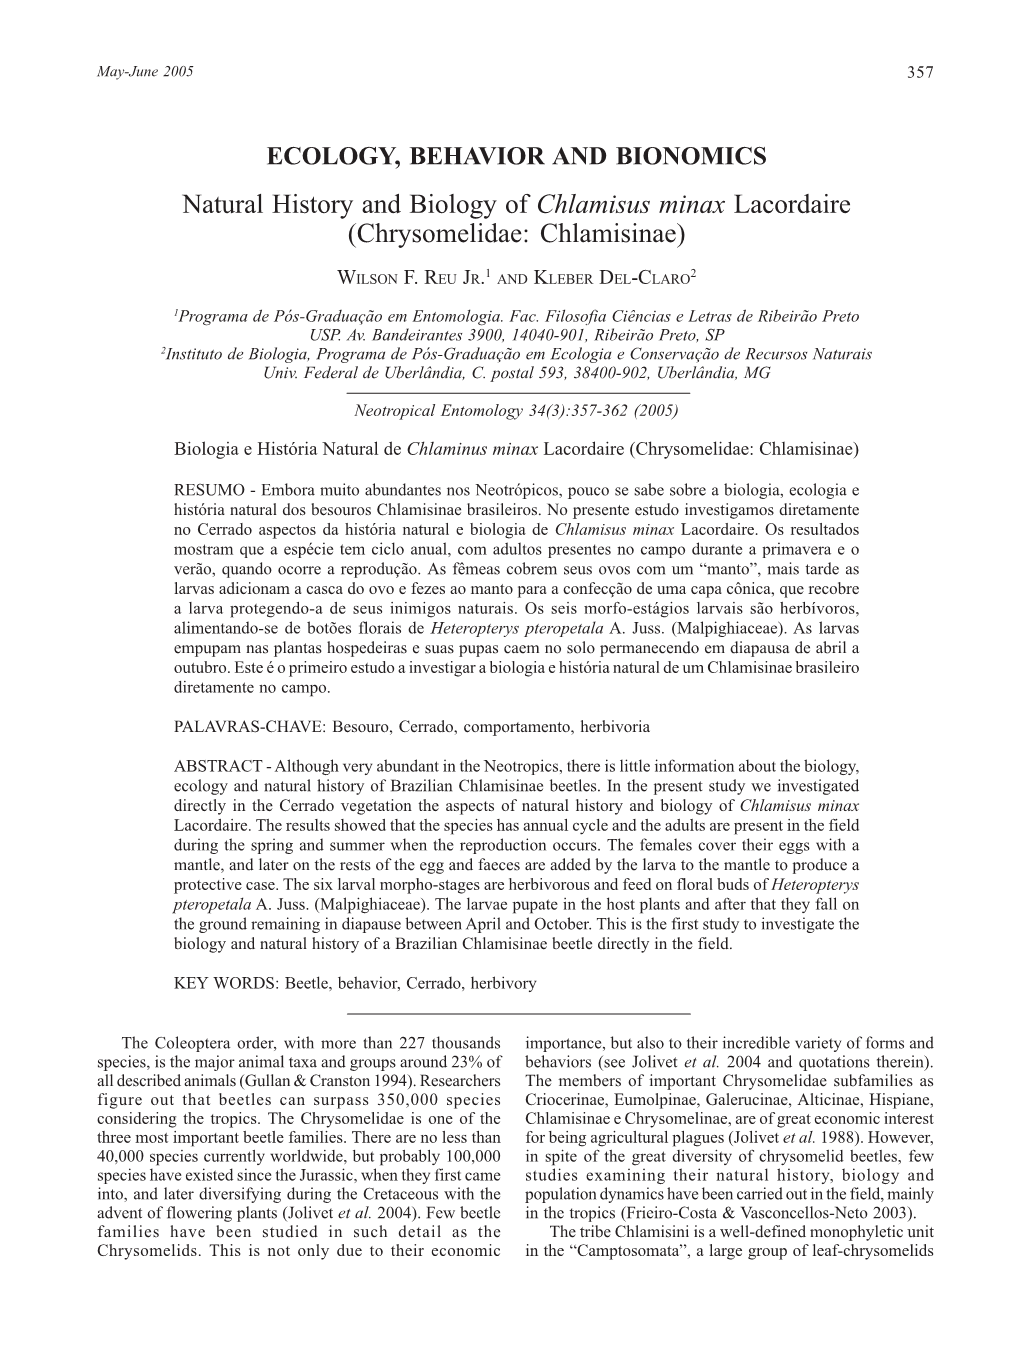 Natural History and Biology of Chlamisus Minax Lacordaire (Chrysomelidae: Chlamisinae)